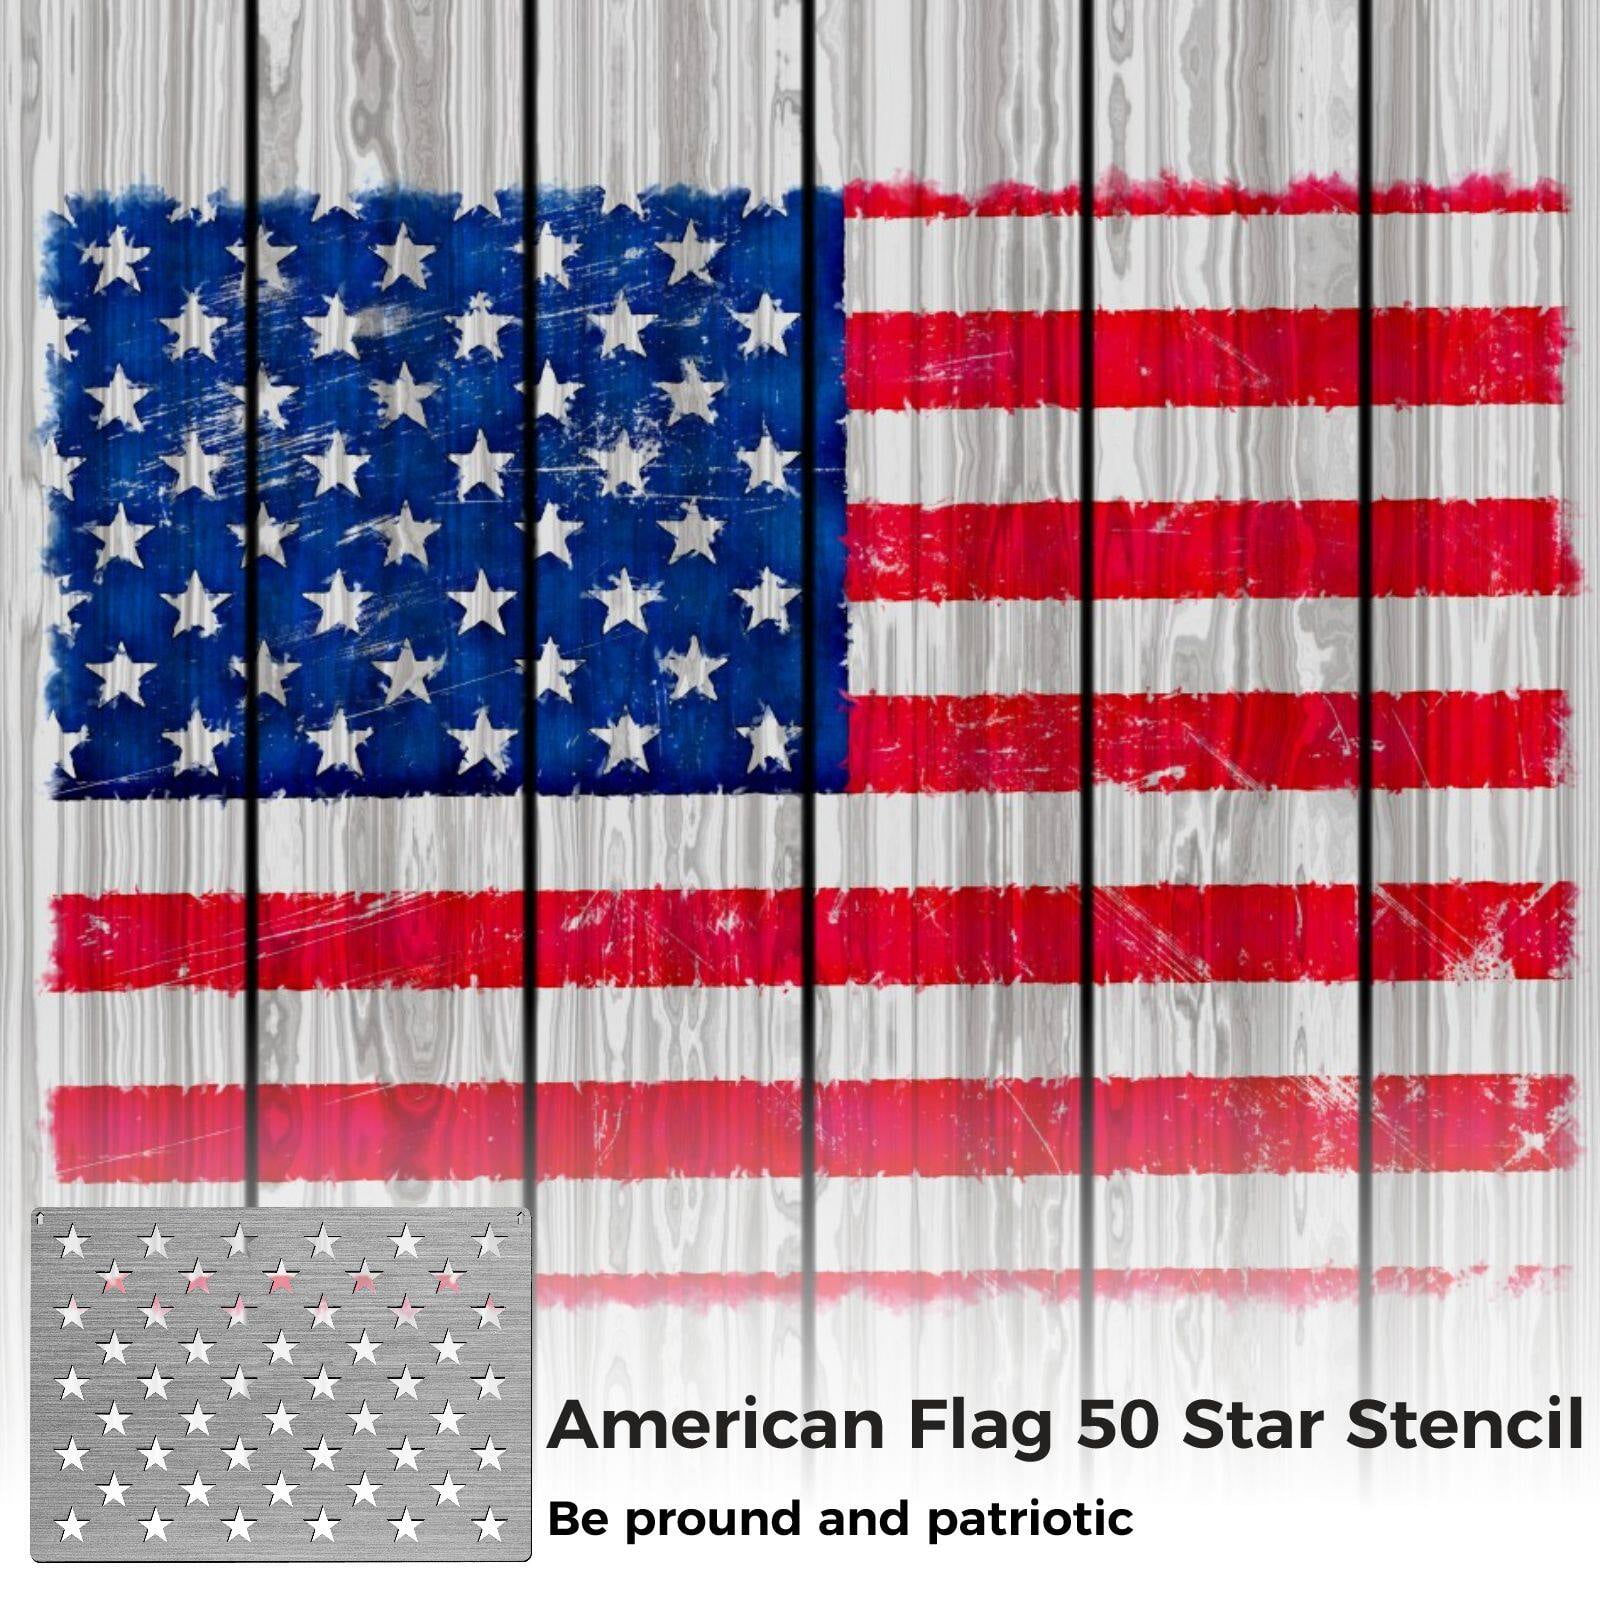 10x15in American Flag 50 Star Stencil Template, Stainless Steel